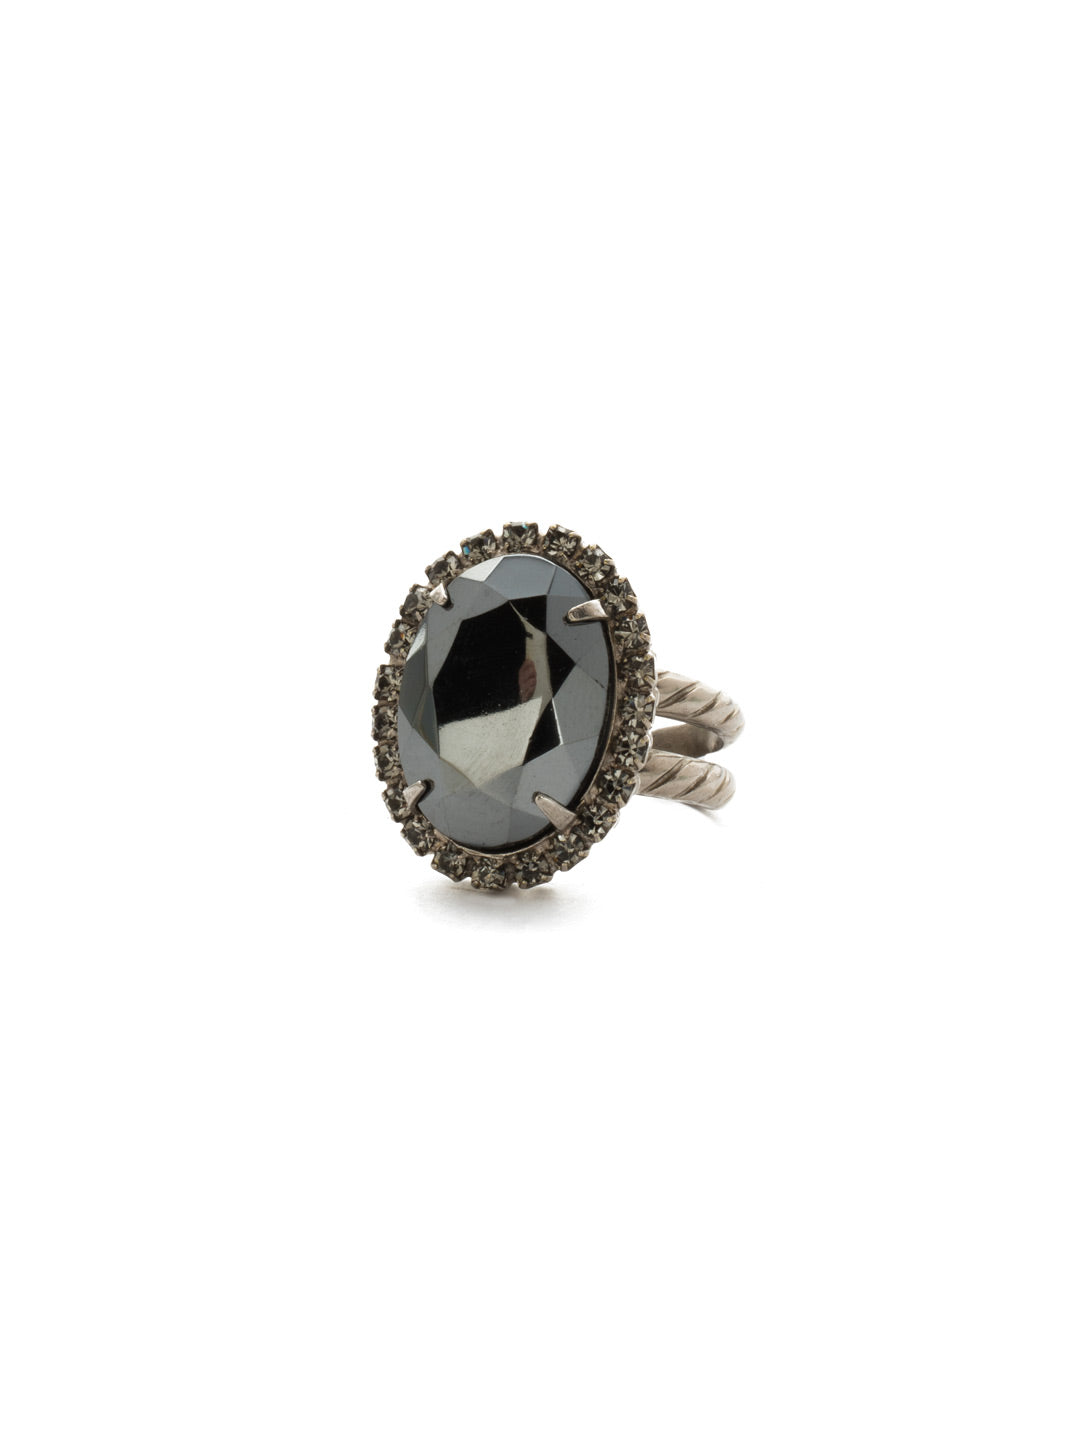 Classic Oval Cut Ring - RDG70ASBON - <p>A jewelry collection must! This glamorous ring features a bold oval cut center crystal surrounded by crystal accents that sits on an adjustable, textured band. An antique-inspired classic. From Sorrelli's Black Onyx collection in our Antique Silver-tone finish.</p>